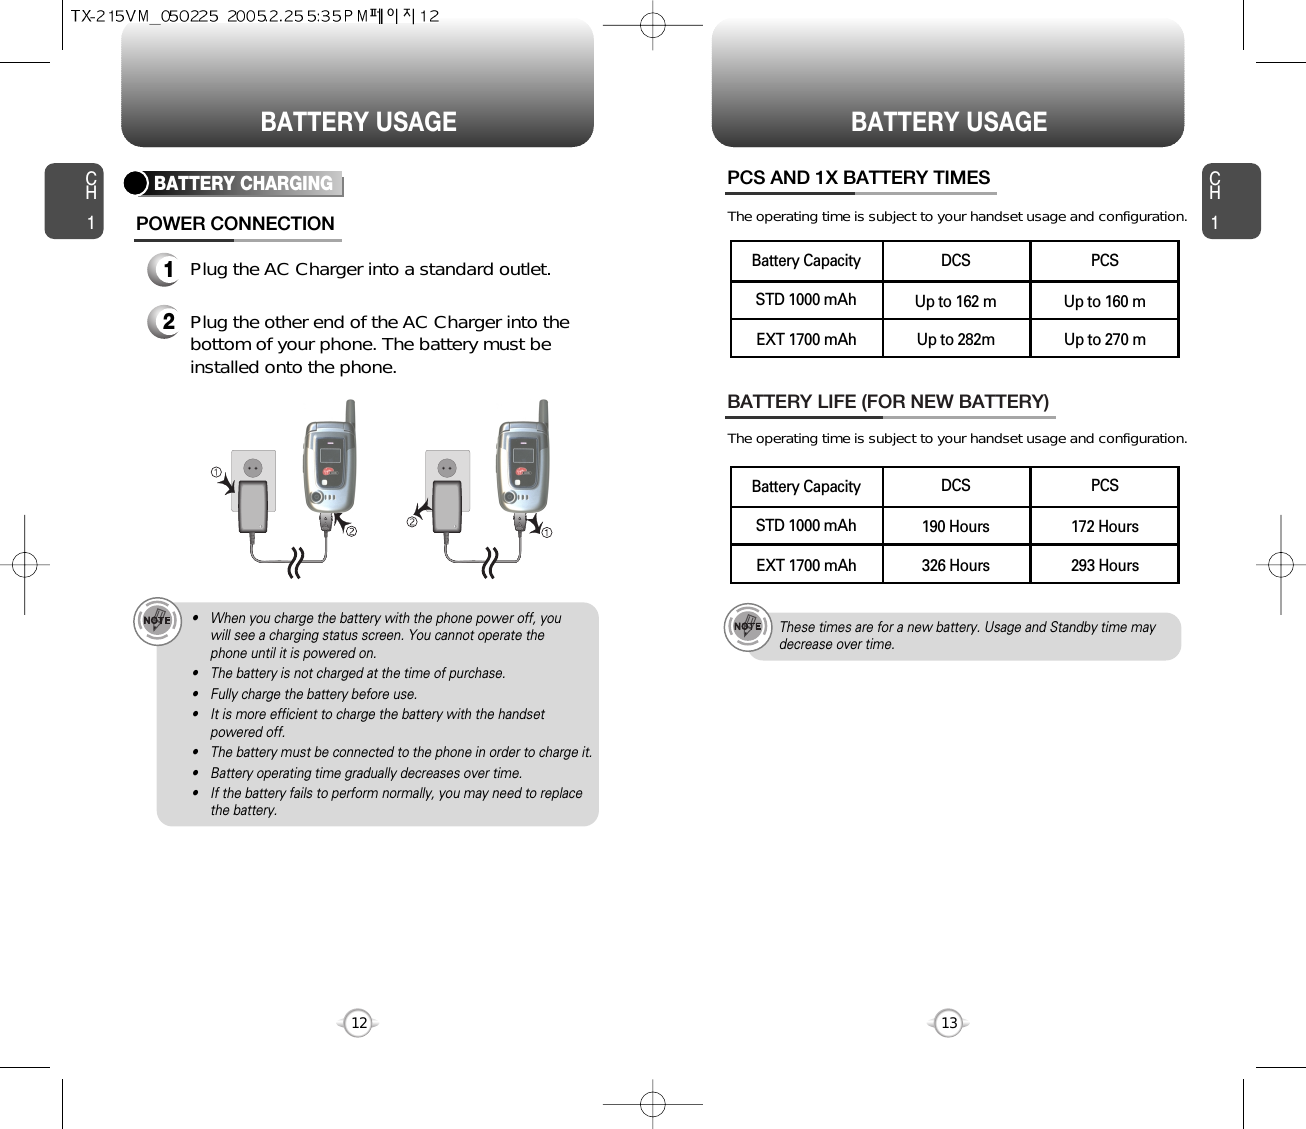 CH113CH112BATTERY USAGE BATTERY USAGEBATTERY LIFE (FOR NEW BATTERY)The operating time is subject to your handset usage and configuration.PCS AND 1X BATTERY TIMESThe operating time is subject to your handset usage and configuration.These times are for a new battery. Usage and Standby time maydecrease over time.• When you charge the battery with the phone power off, you will see a charging status screen. You cannot operate the phone until it is powered on.• The battery is not charged at the time of purchase.• Fully charge the battery before use.• It is more efficient to charge the battery with the handsetpowered off.• The battery must be connected to the phone in order to charge it.• Battery operating time gradually decreases over time.• If the battery fails to perform normally, you may need to replacethe battery.1Plug the AC Charger into a standard outlet.2Plug the other end of the AC Charger into thebottom of your phone. The battery must beinstalled onto the phone.BATTERY CHARGINGPOWER CONNECTIONPCSUp to 160 mUp to 270 mDCSUp to 162 mUp to 282mSTD 1000 mAhBattery CapacityEXT 1700 mAhPCS172 Hours293 HoursDCS190 Hours326 HoursSTD 1000 mAhBattery CapacityEXT 1700 mAh